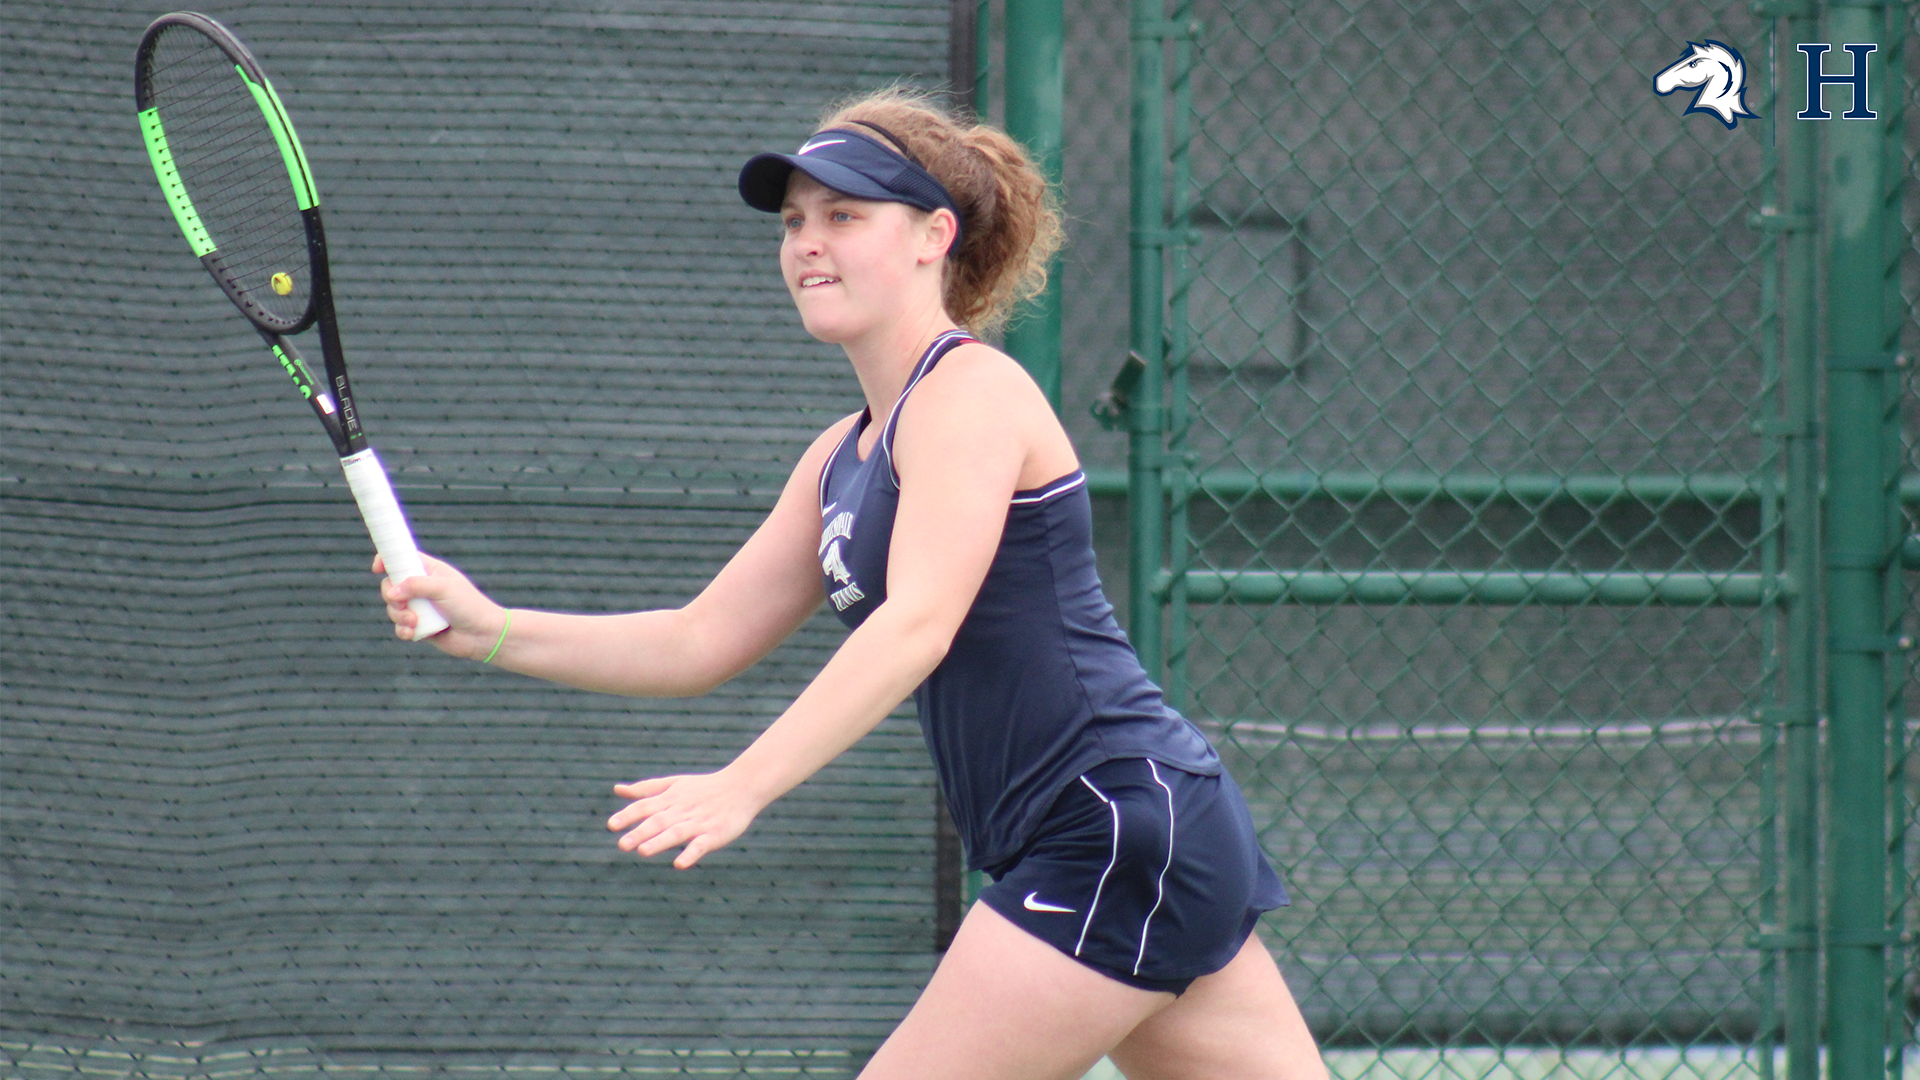 Charger women's tennis team stuns top-seeded Tiffin, 4-2, advances to G-MAC Final